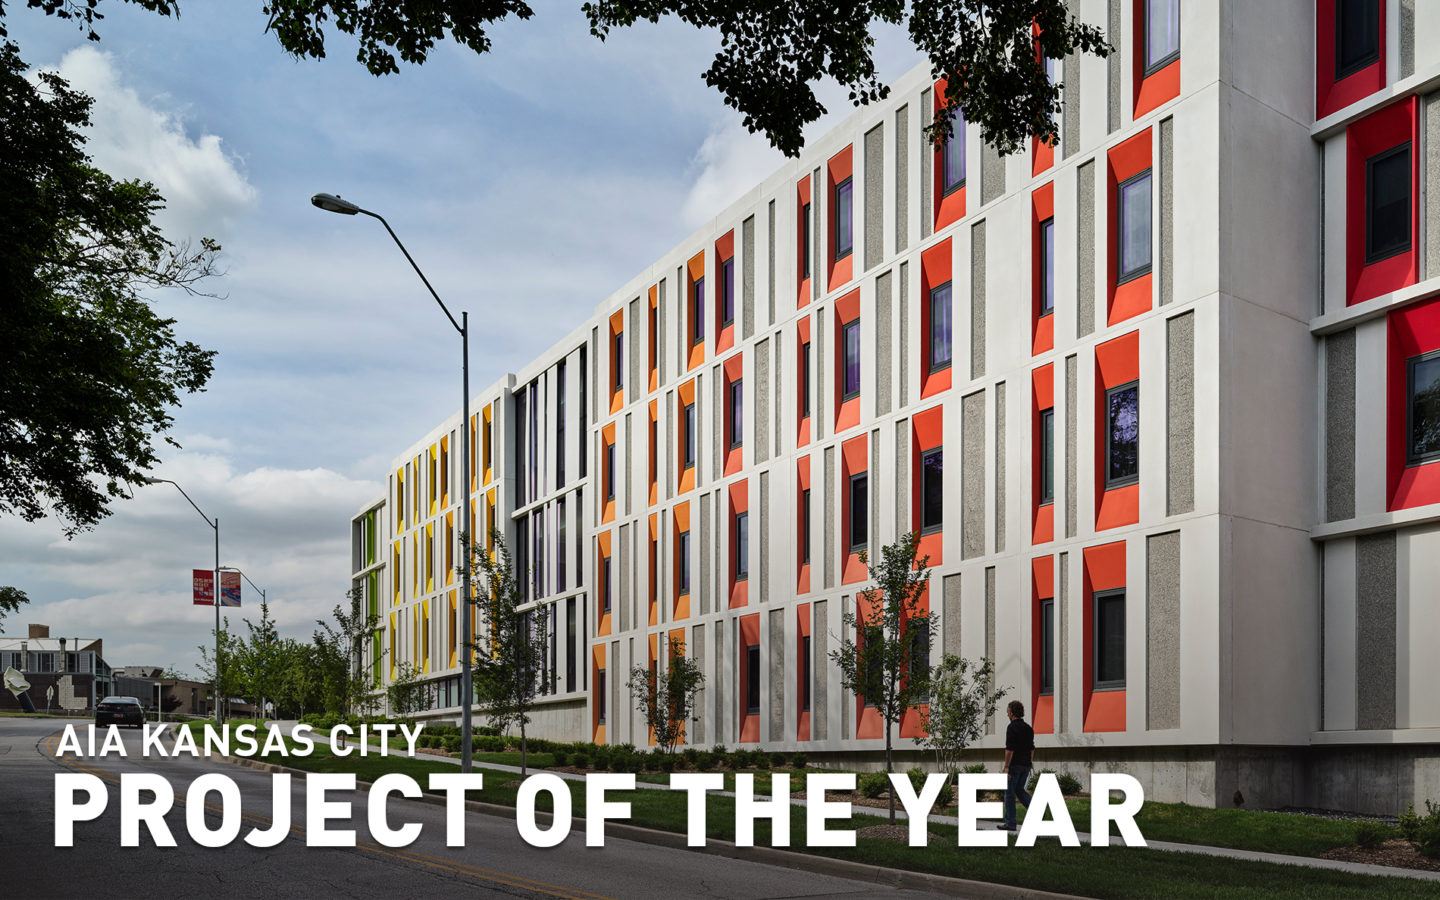 Residence Hall with PROJECT OF THE YEAR text